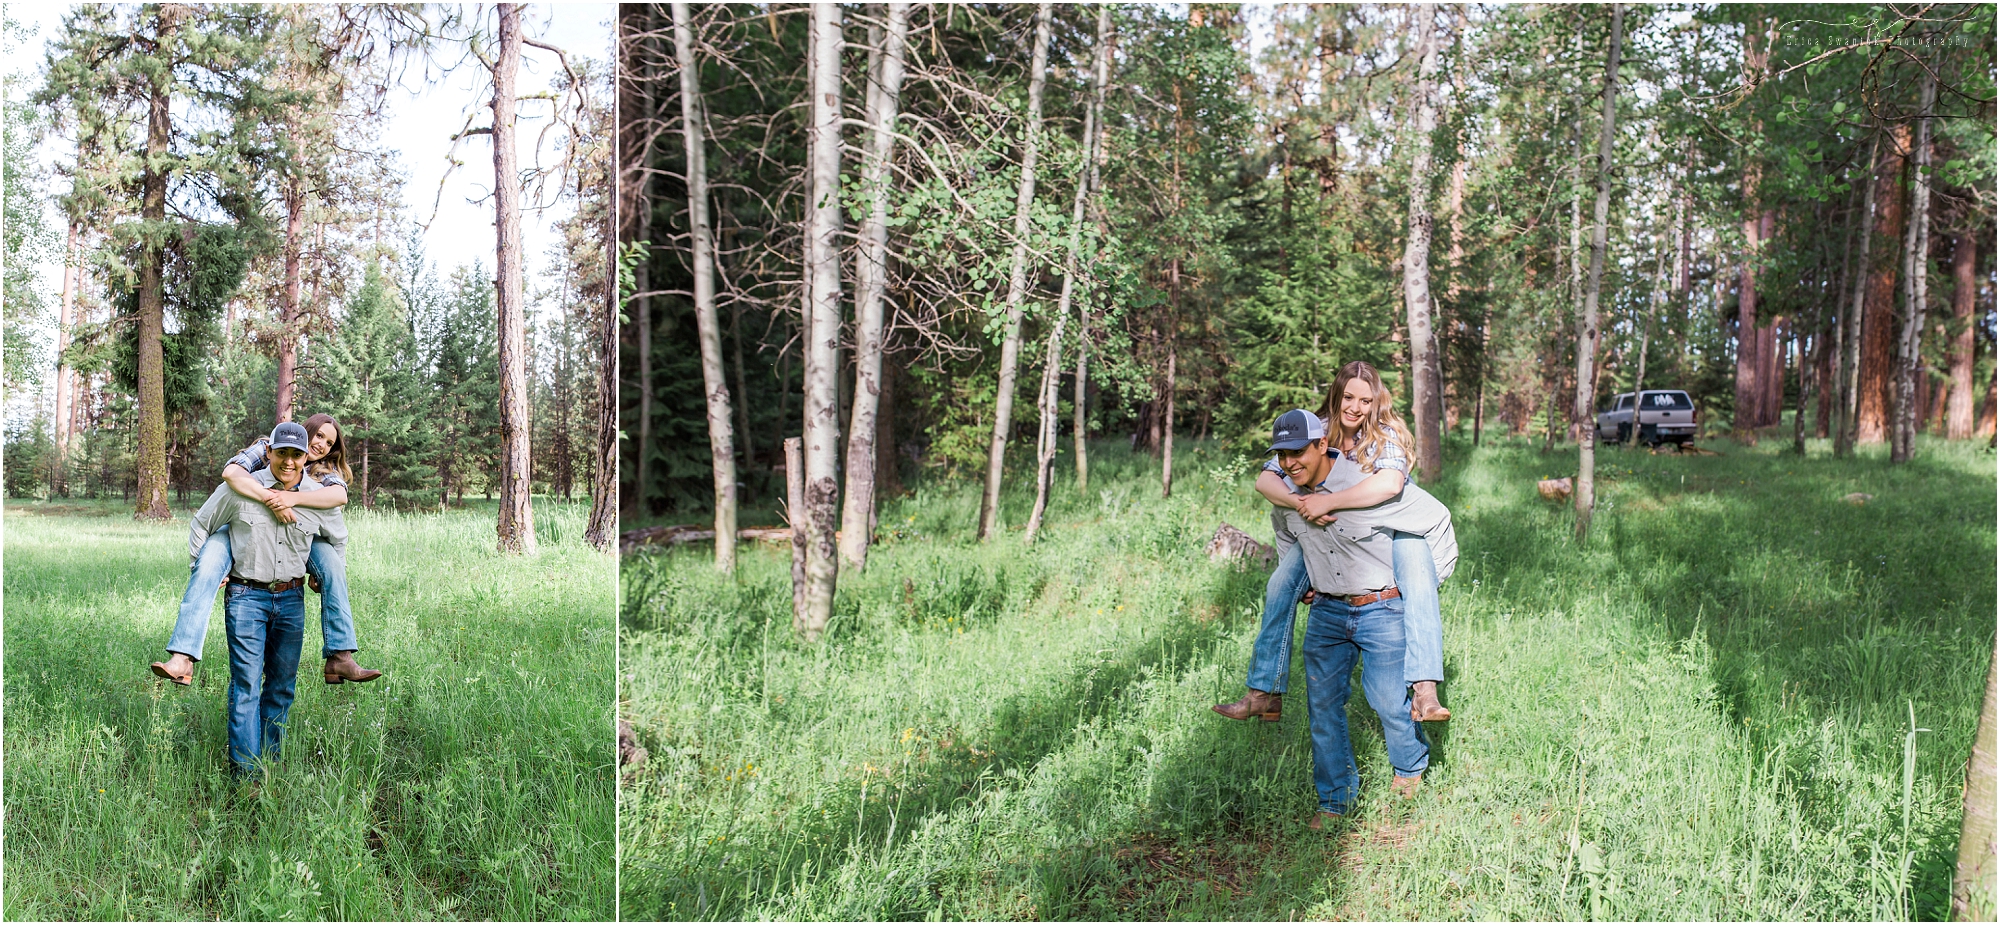 A gorgeous Oregon outdoor adventure engagement session in which the bride-to-be receives a piggyback ride from her beau! | Erica Swantek Photography